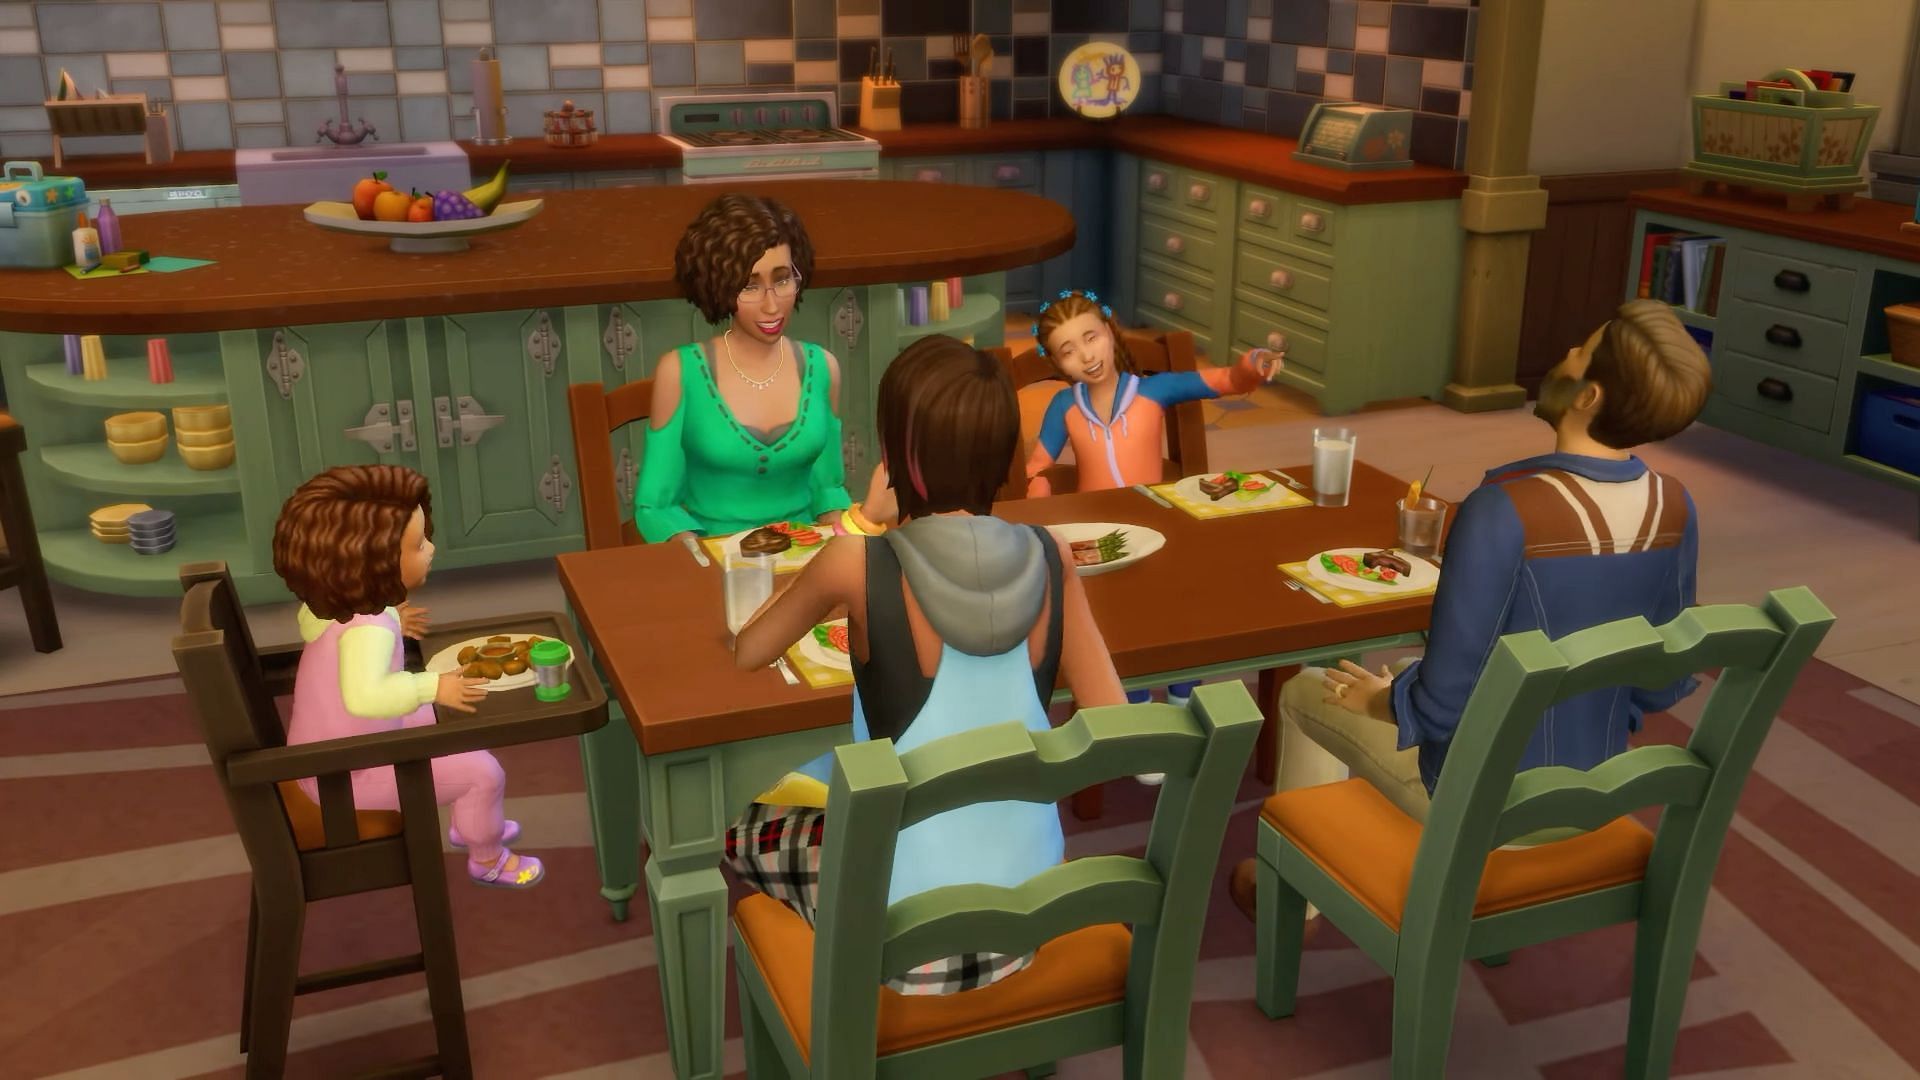 How to influence the gender in The Sims 4 pregnancy guide? (Image via Electronic Arts)